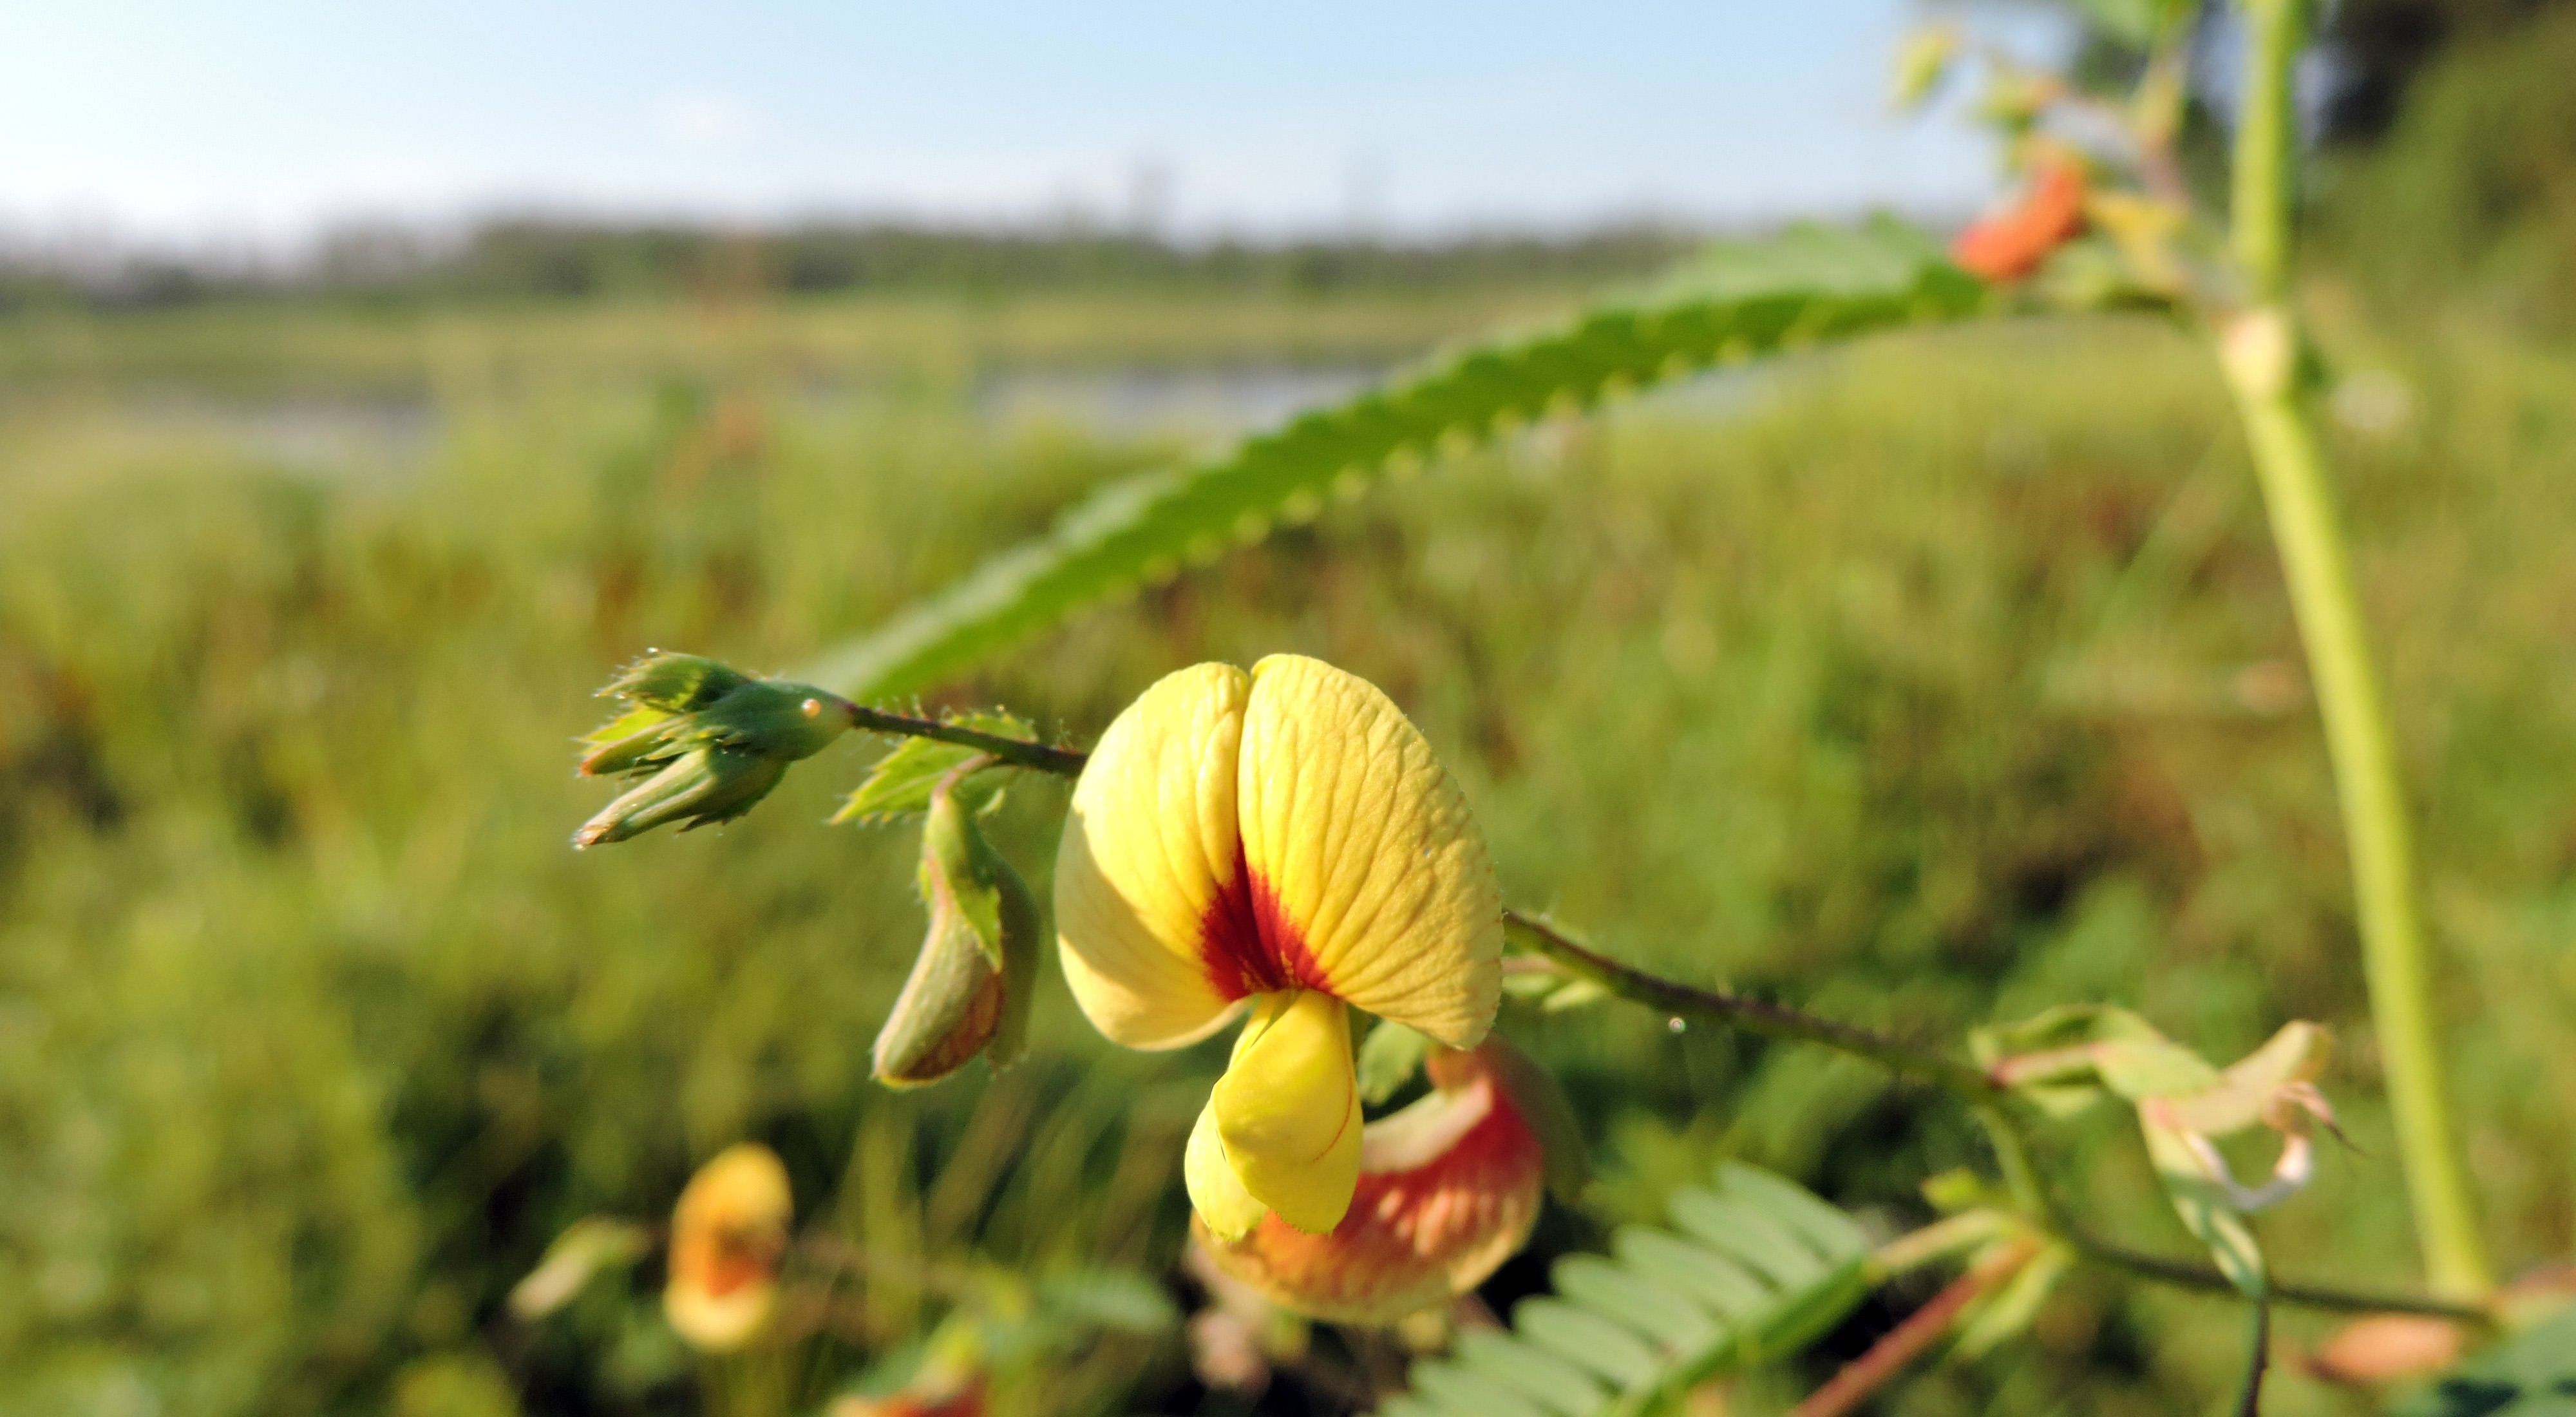 Sensitive Joint Vetch at Cumberland Marsh. A three lobed yellow flower with an orange center. An open wetland is visible in the background.